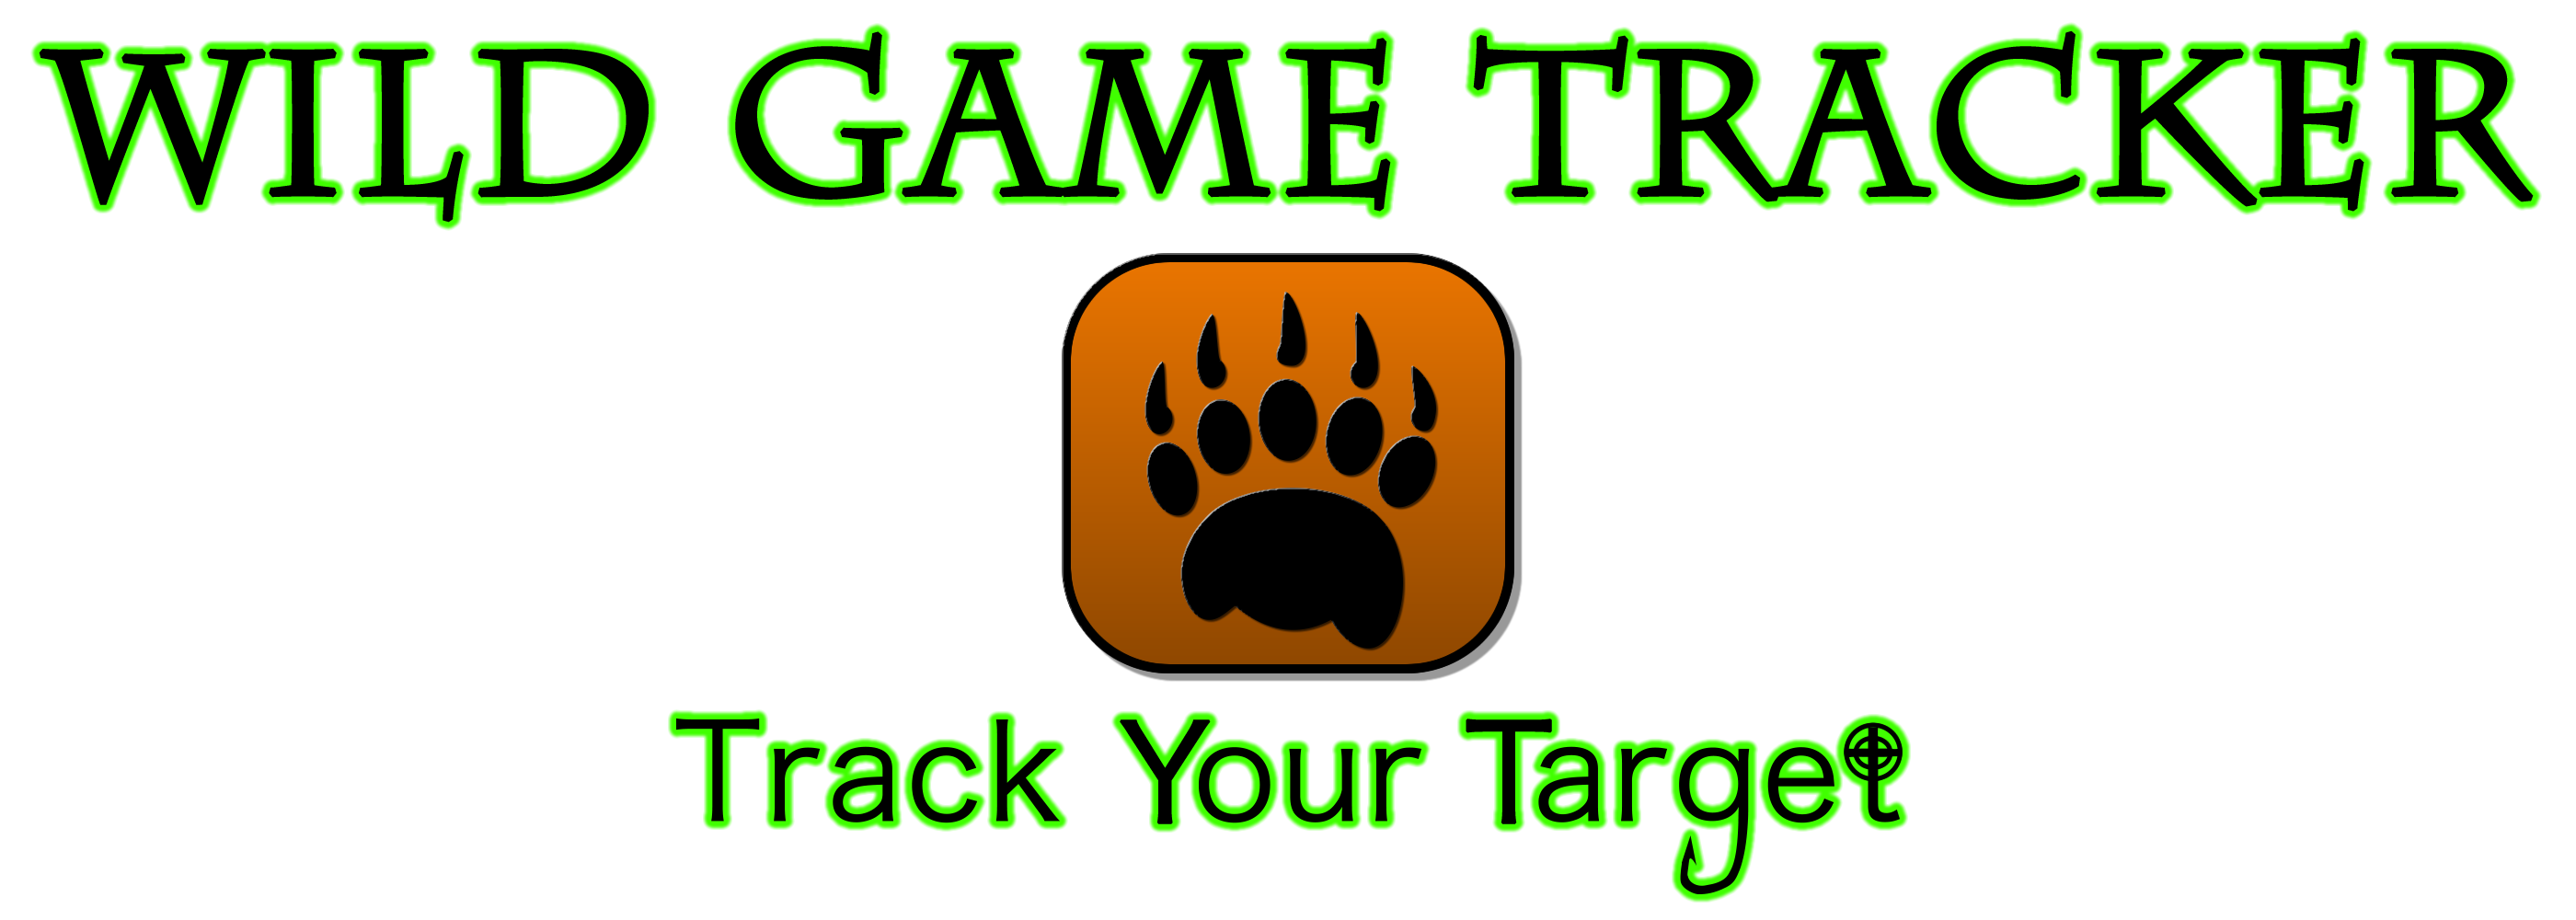 Wild Game Tracker Track Your Target